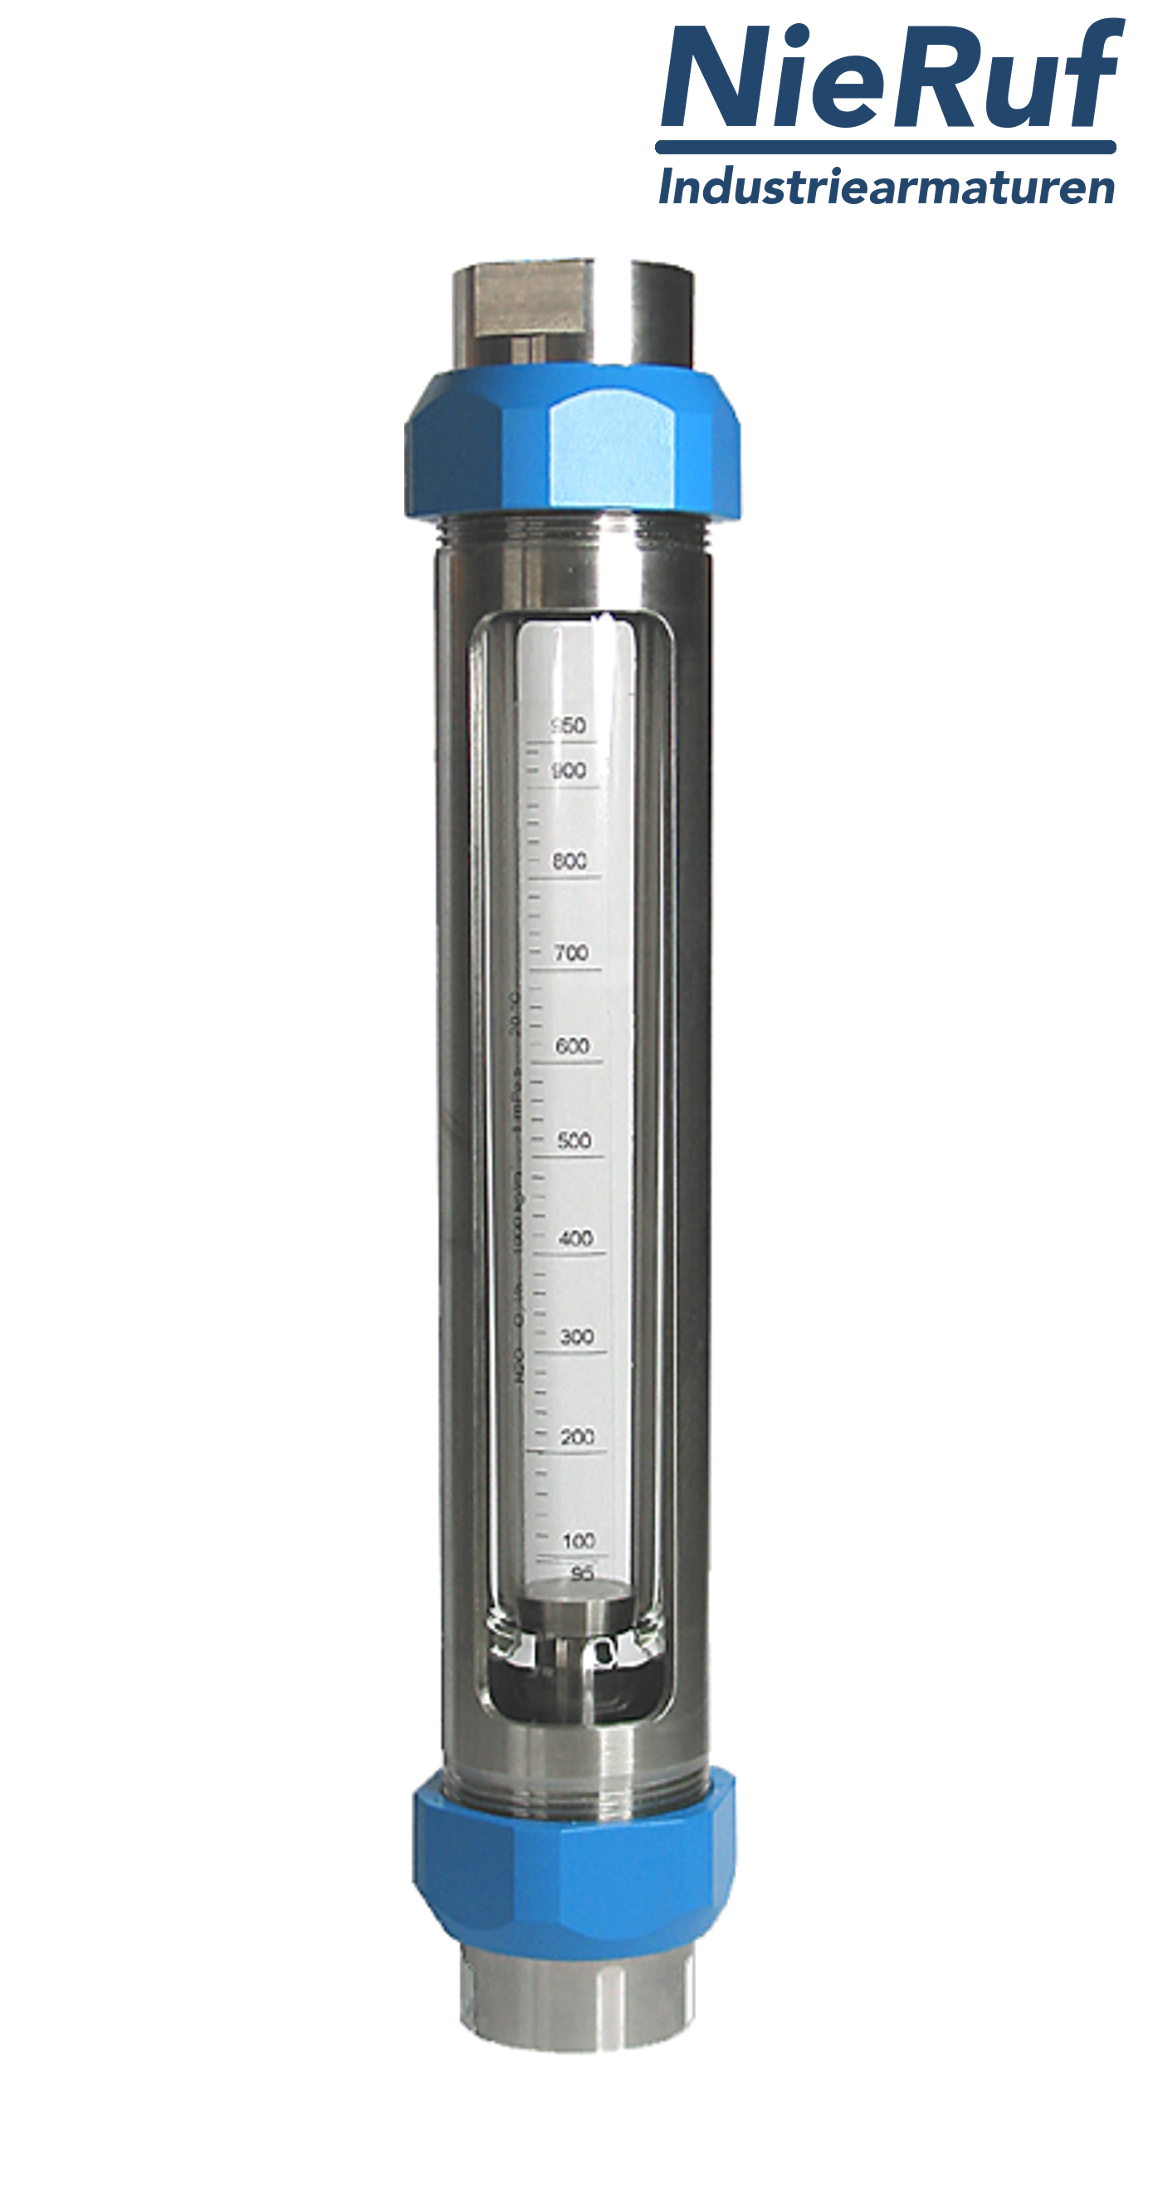 Variable area flowmeter stainless steel + borosilicate 1 1/4" inch 400.0 - 4000 l/h water FKM